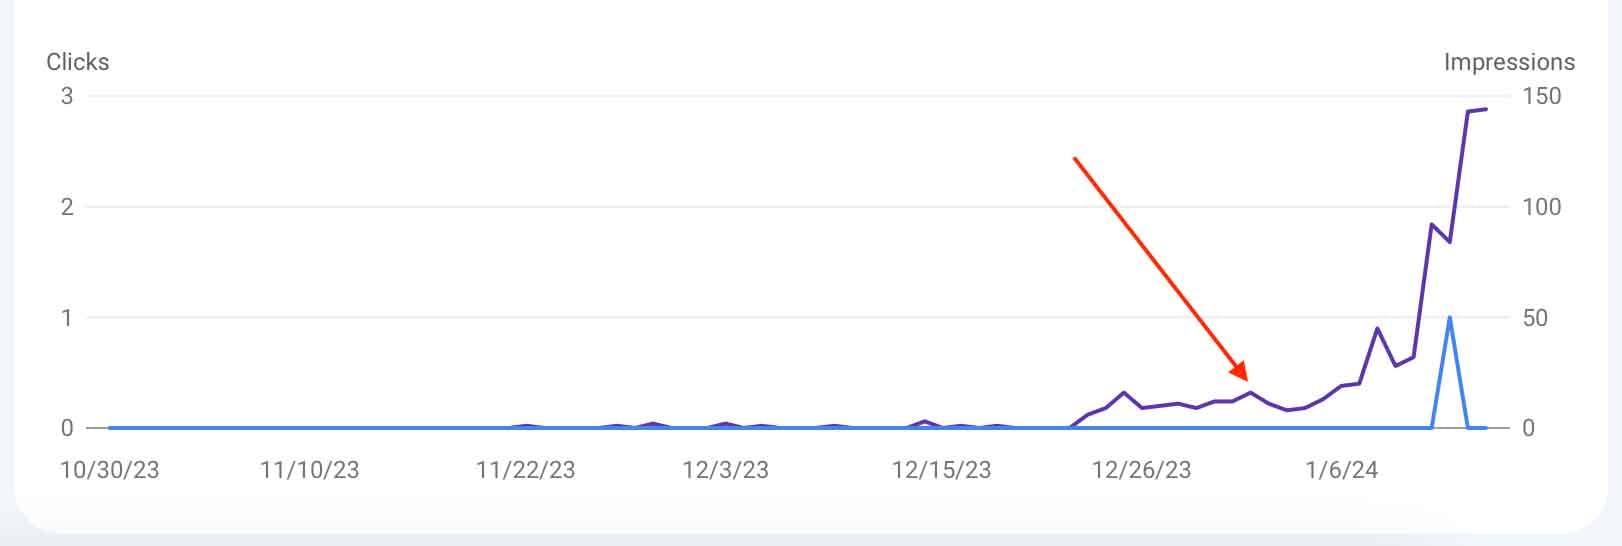 image of a chart showing website traffic going up after a particular date